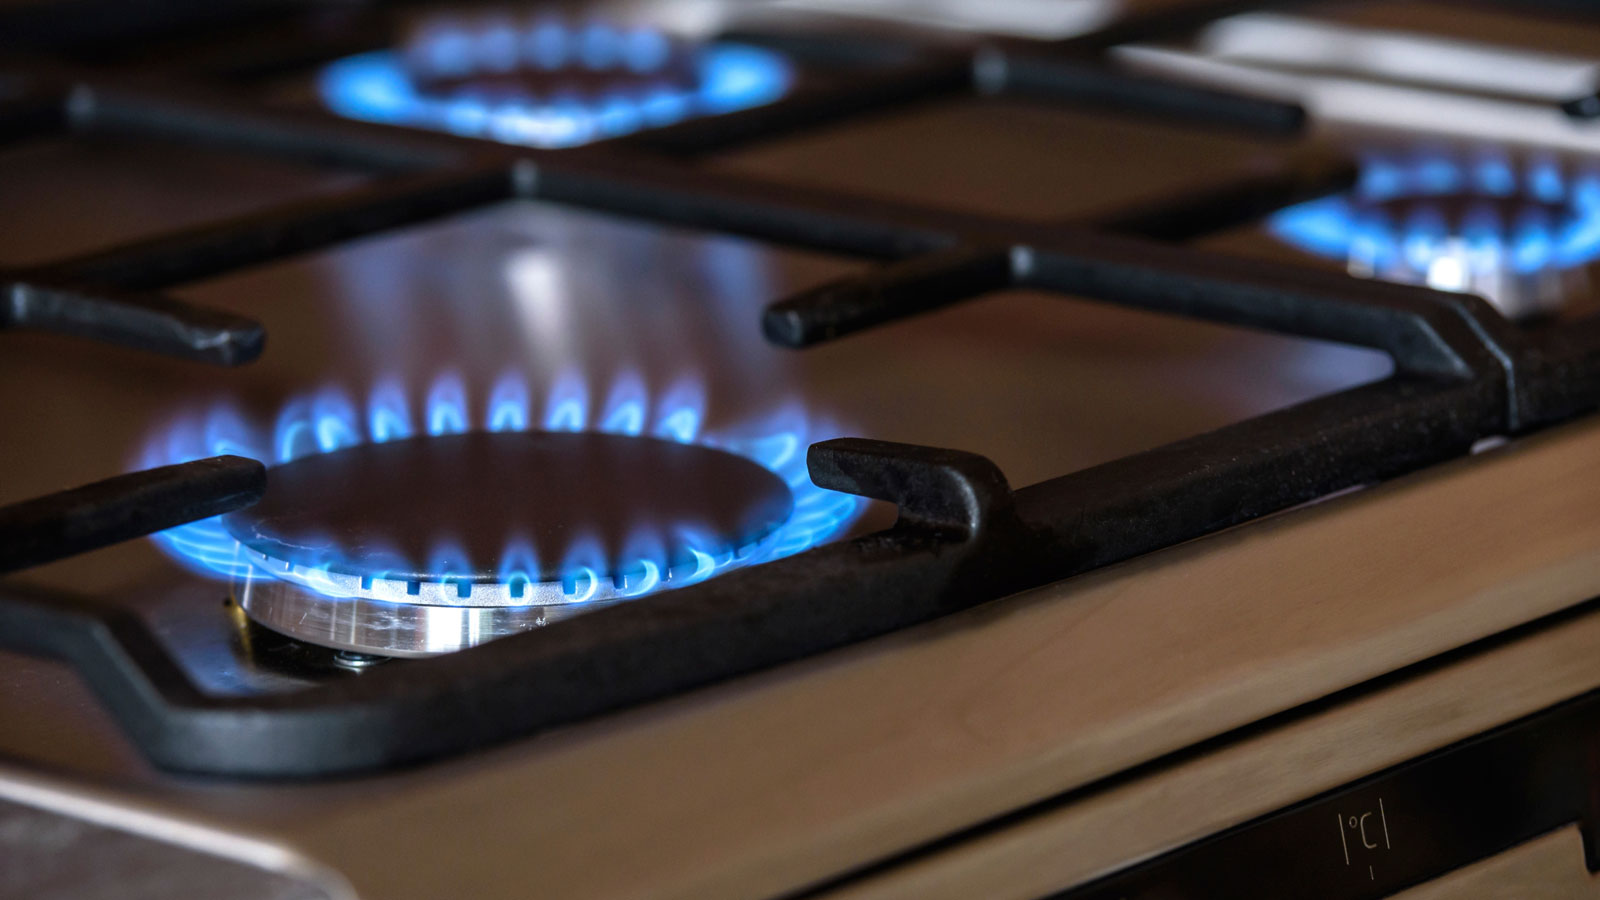 How to cook safely if you're stuck with a gas stove - The Washington Post